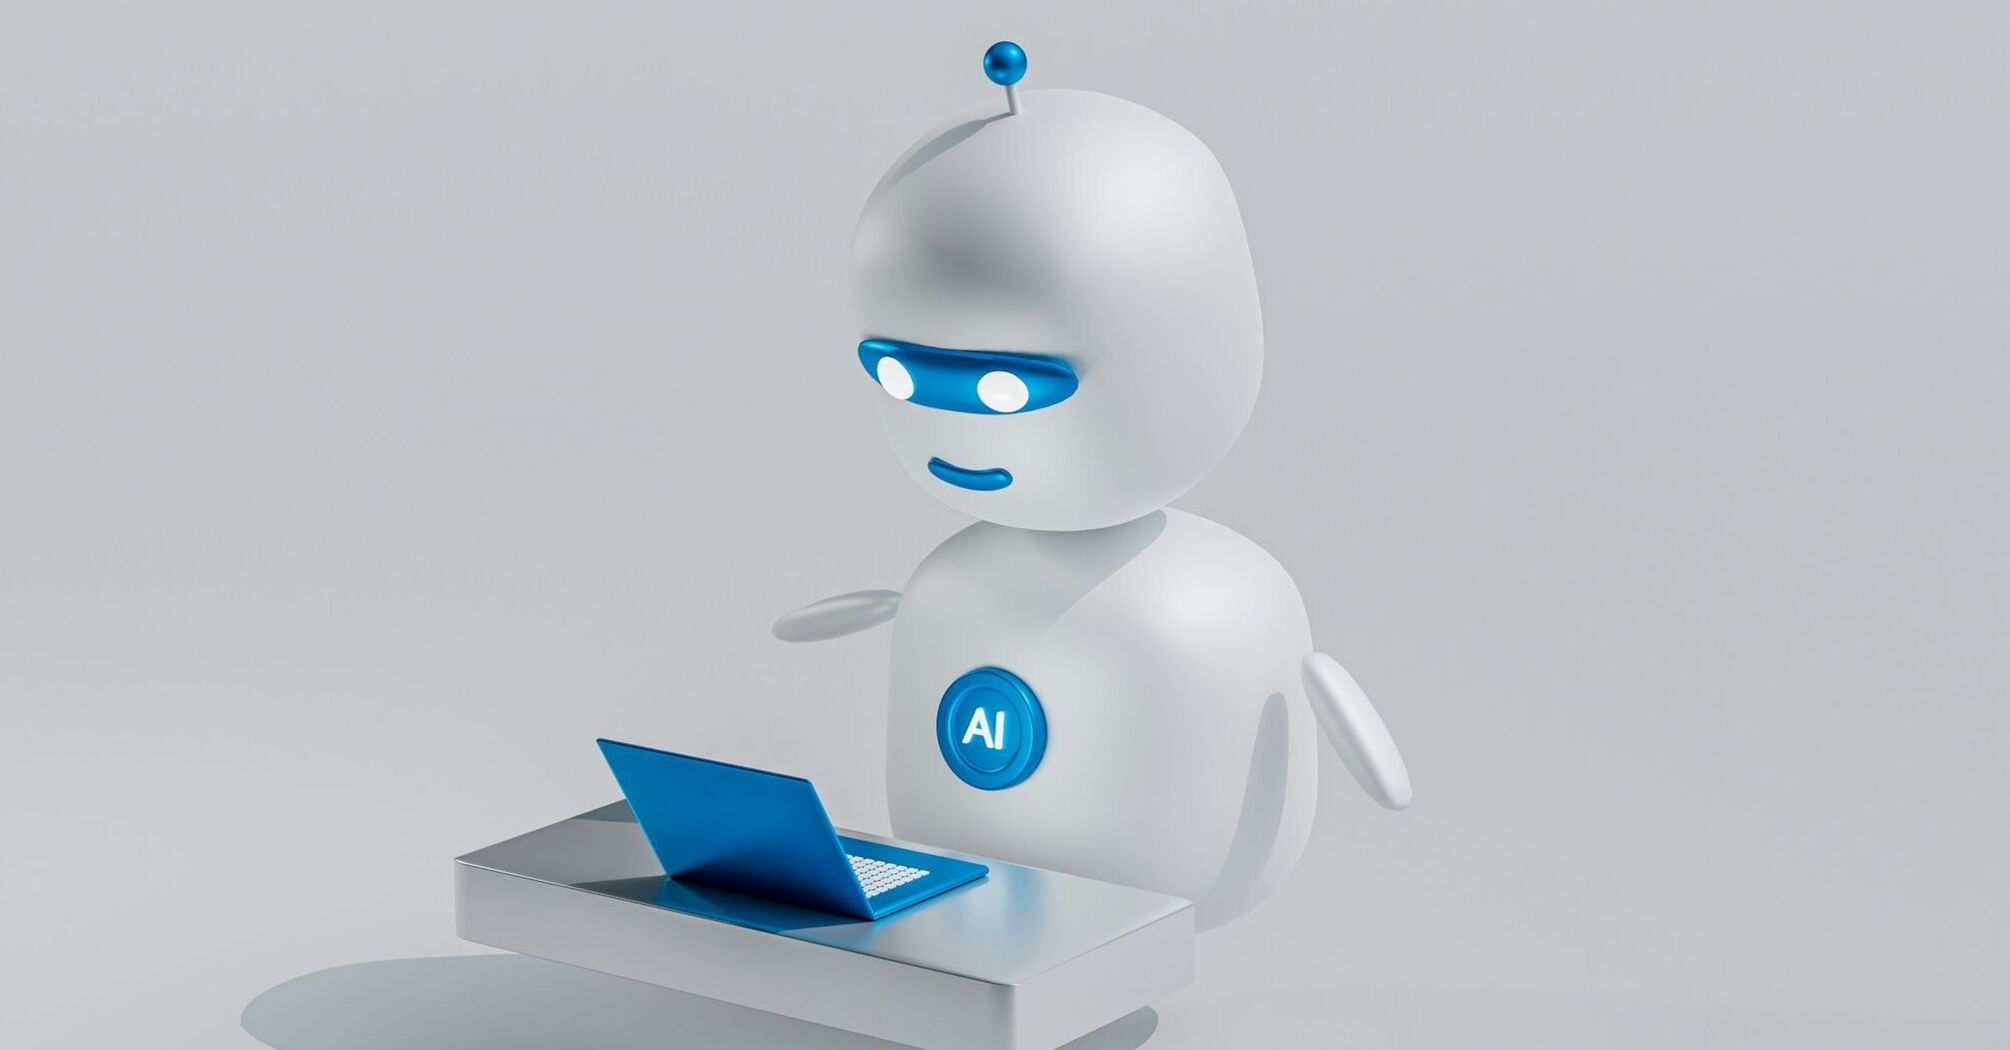 Stylized illustration of a robot with an 'AI' badge working on a laptop